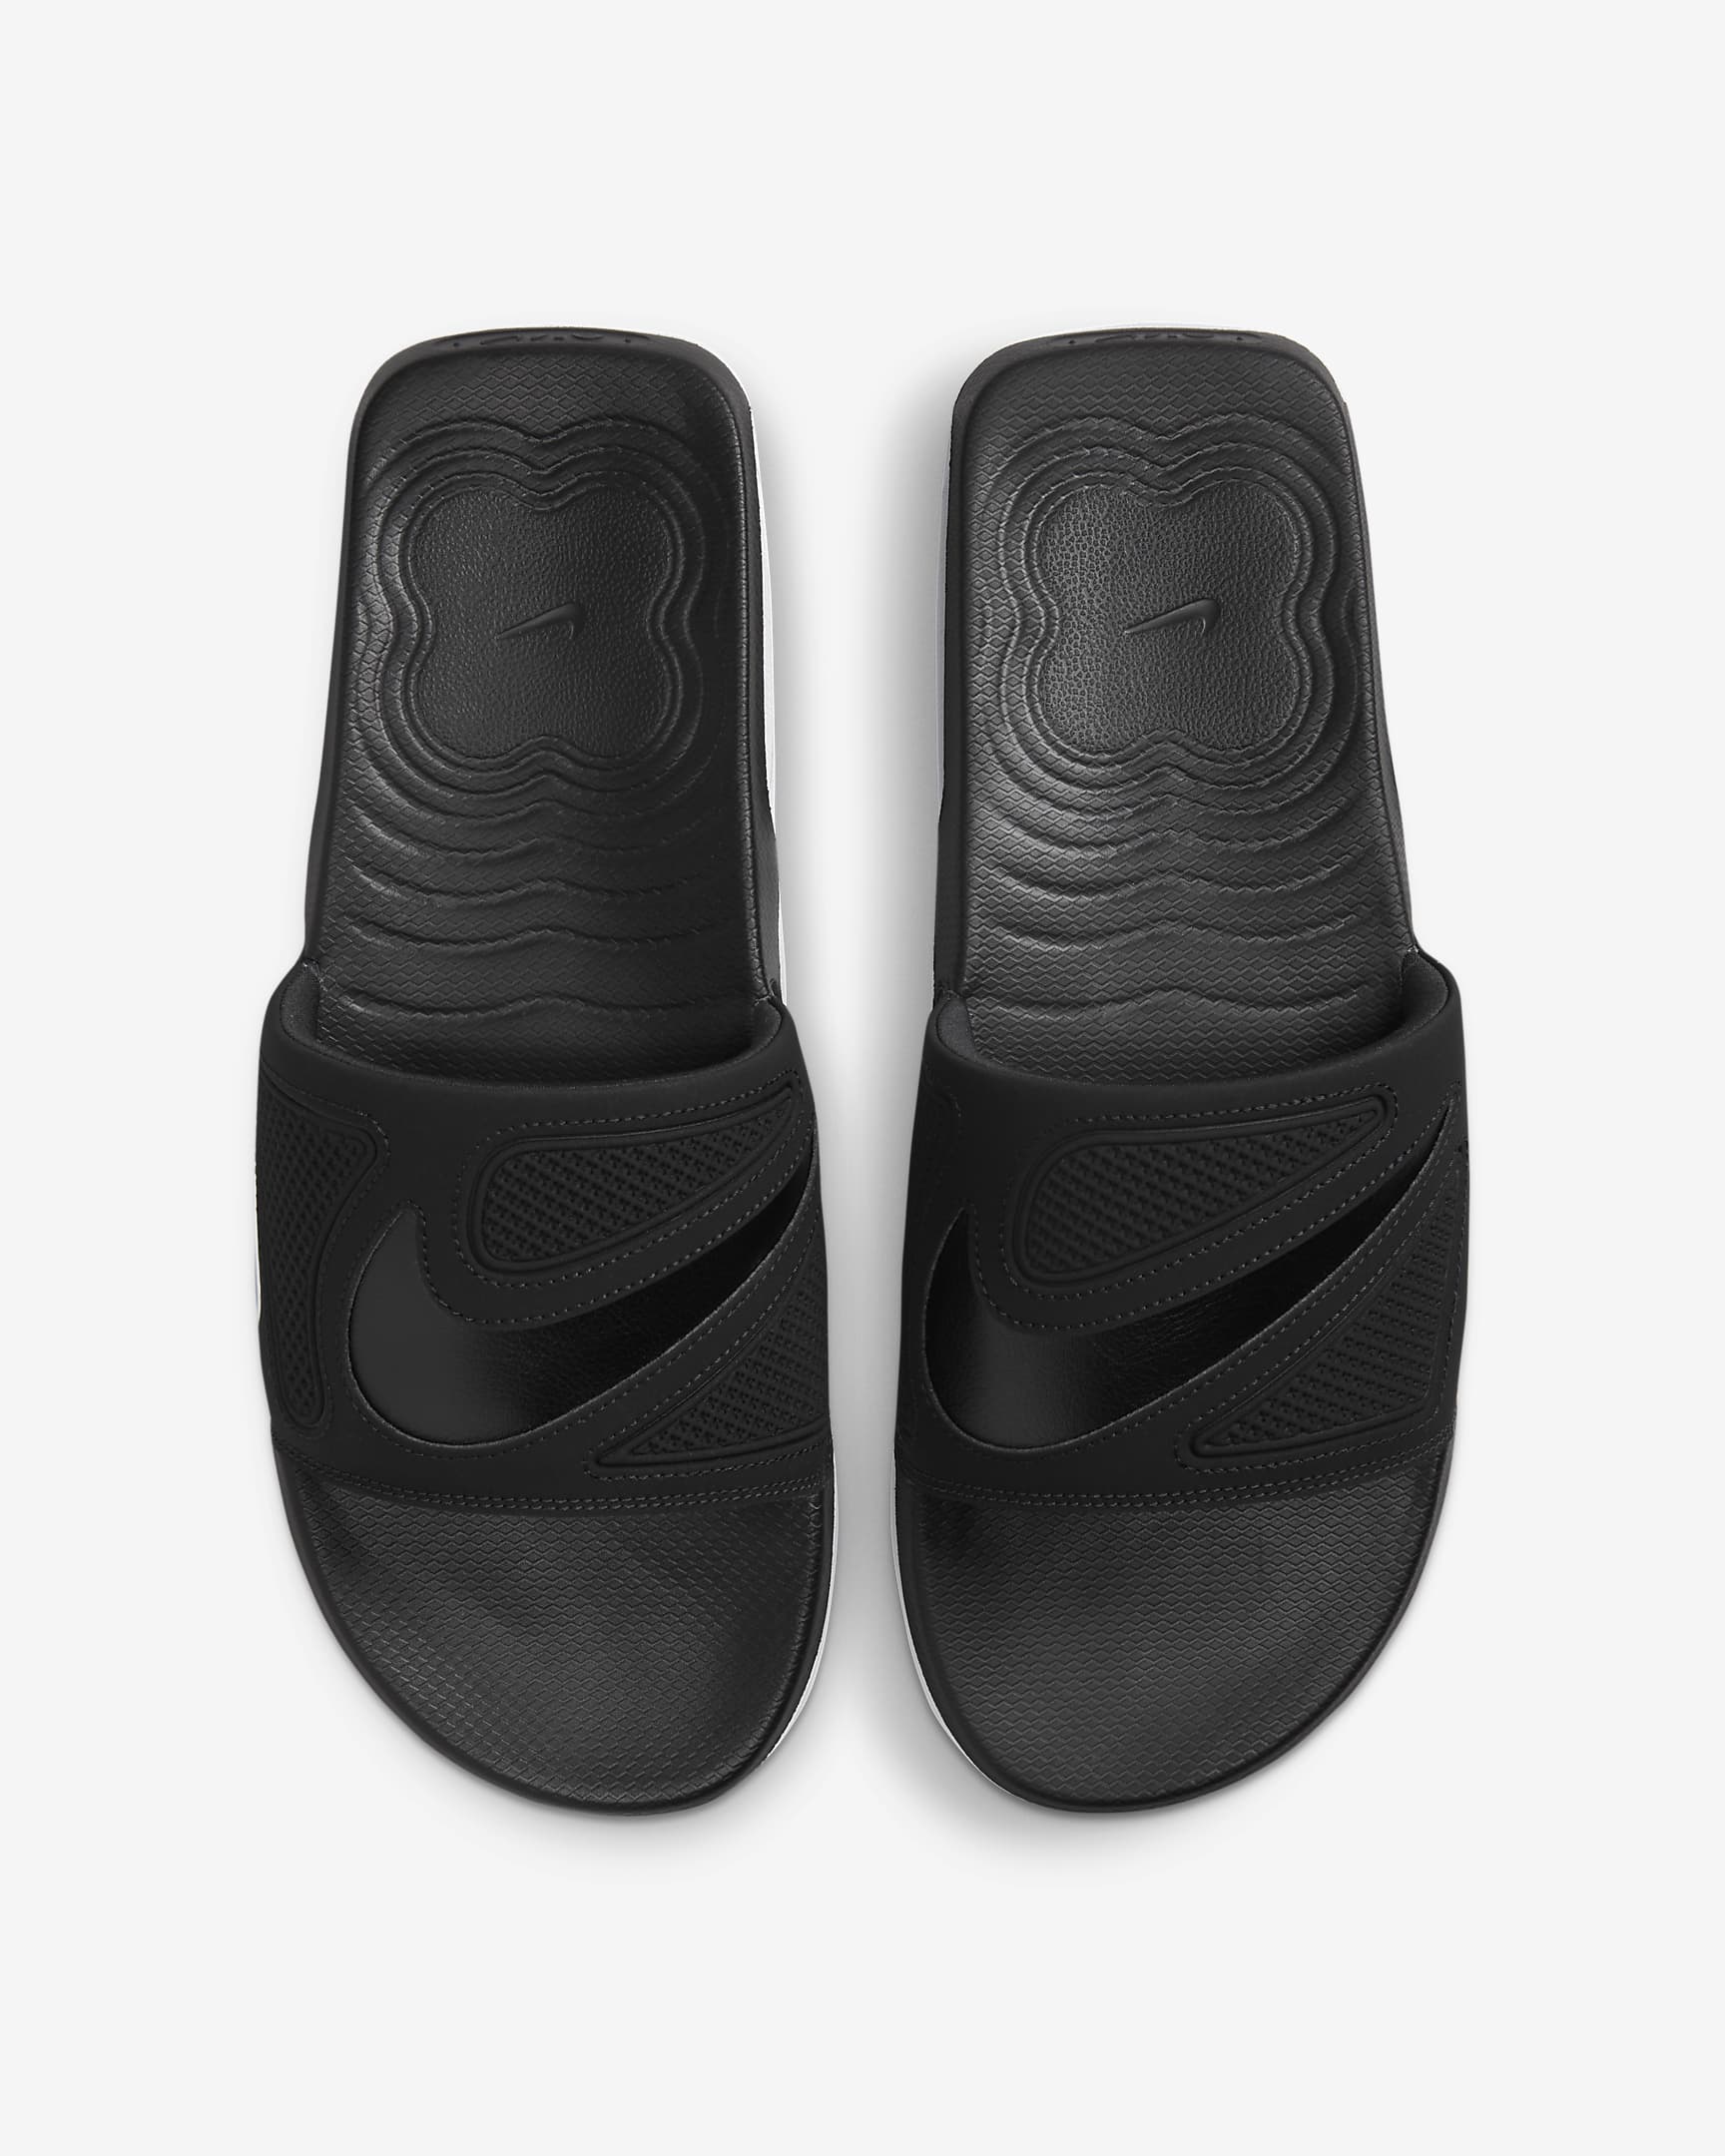 “Are These the Most Comfortable Slides Ever? Nike Air Max Cirro Men’s Slides Review!